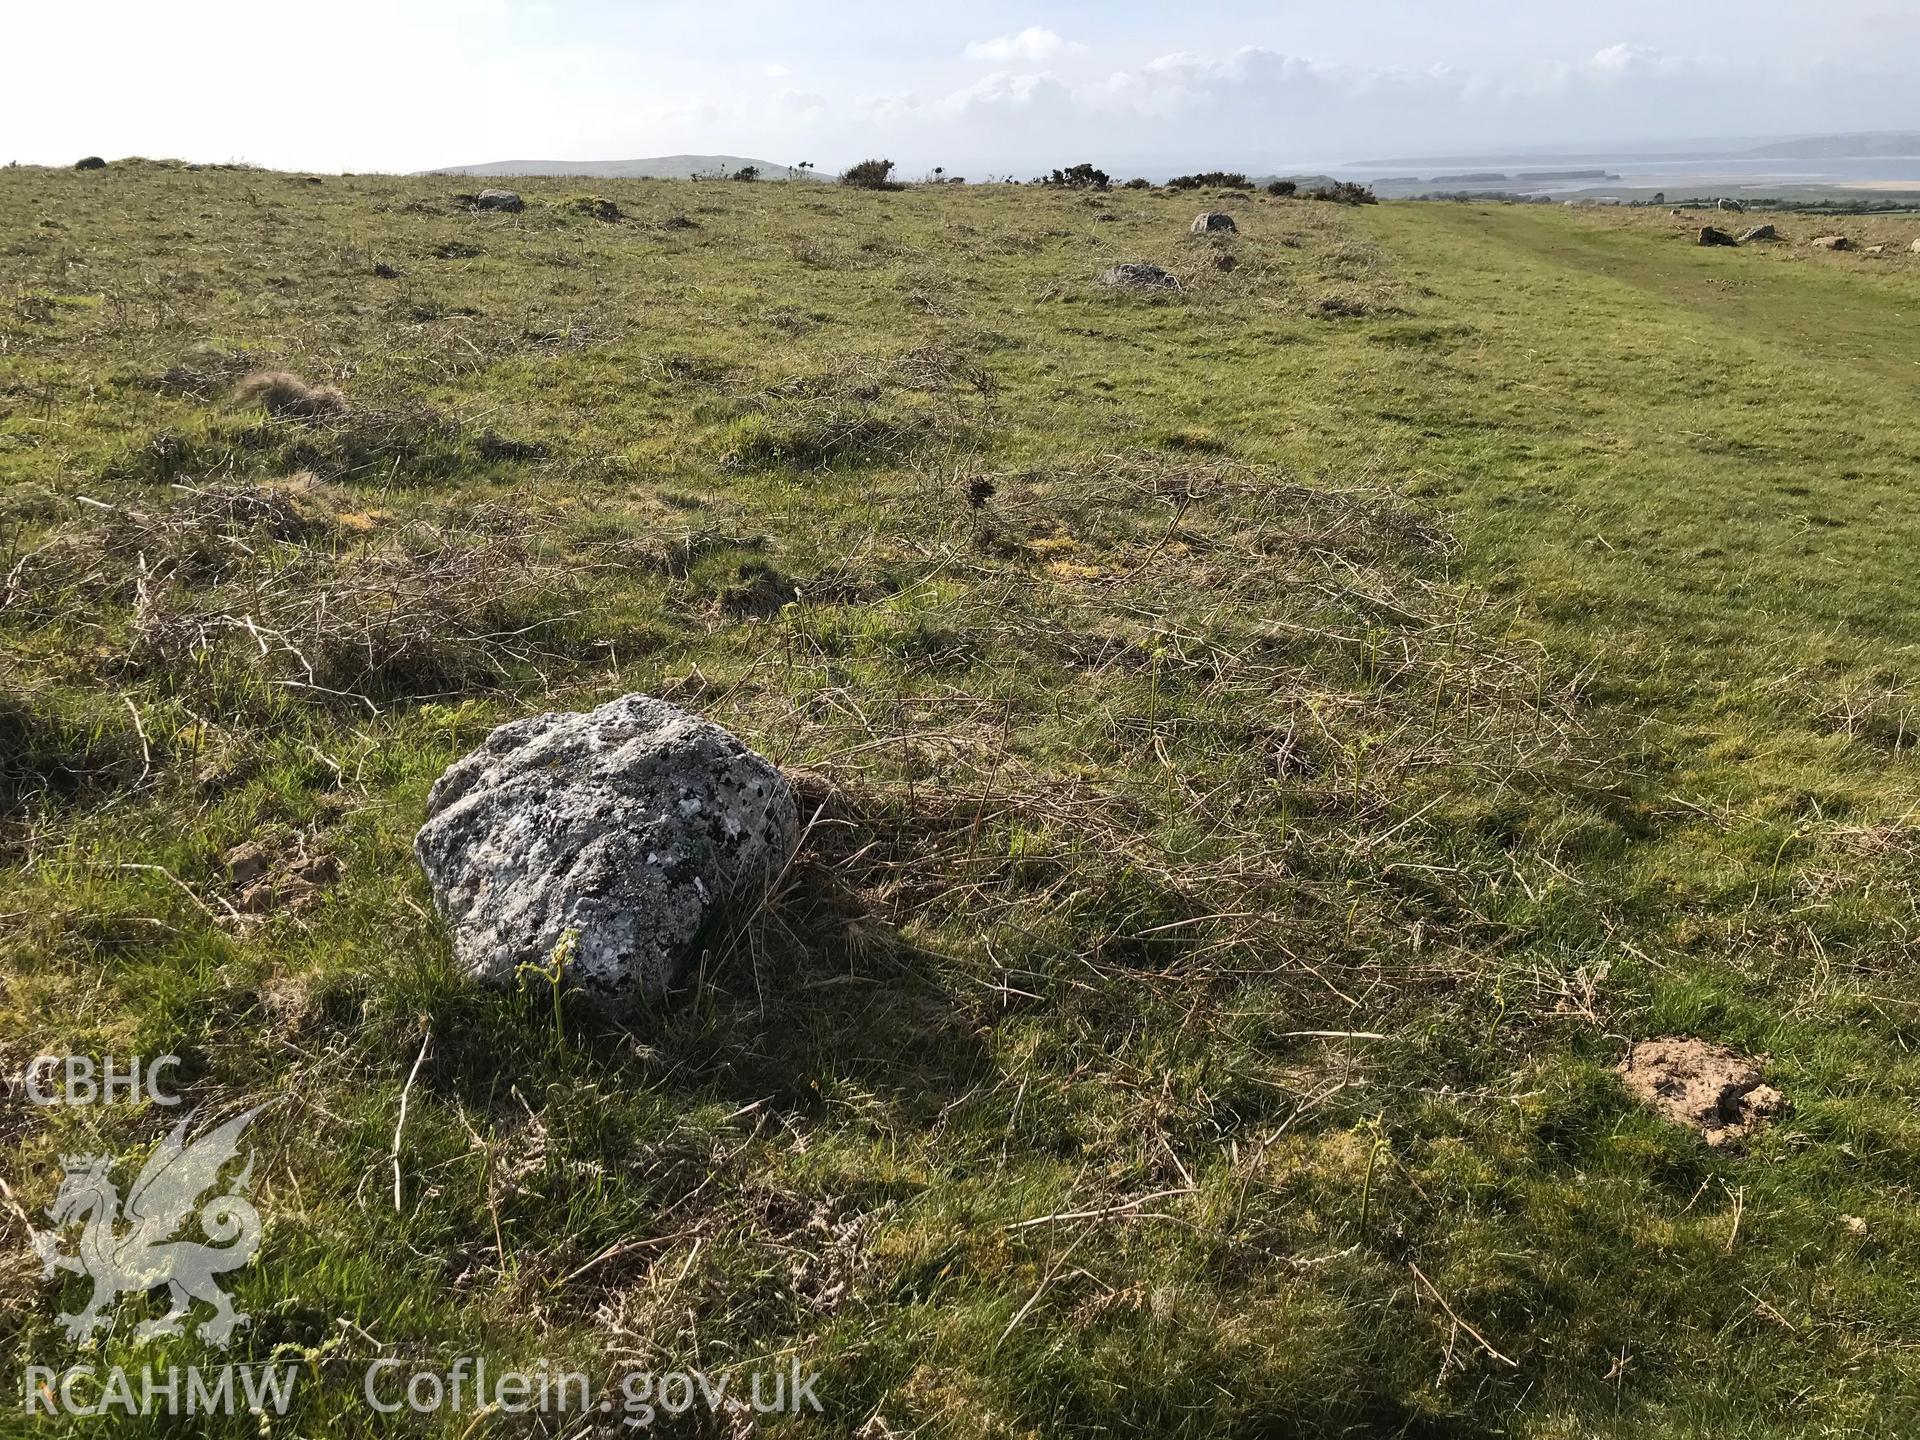 Colour photo showing a possible stone alignment at Cefn Bryn, taken by Paul R. Davis, 10th May 2018.